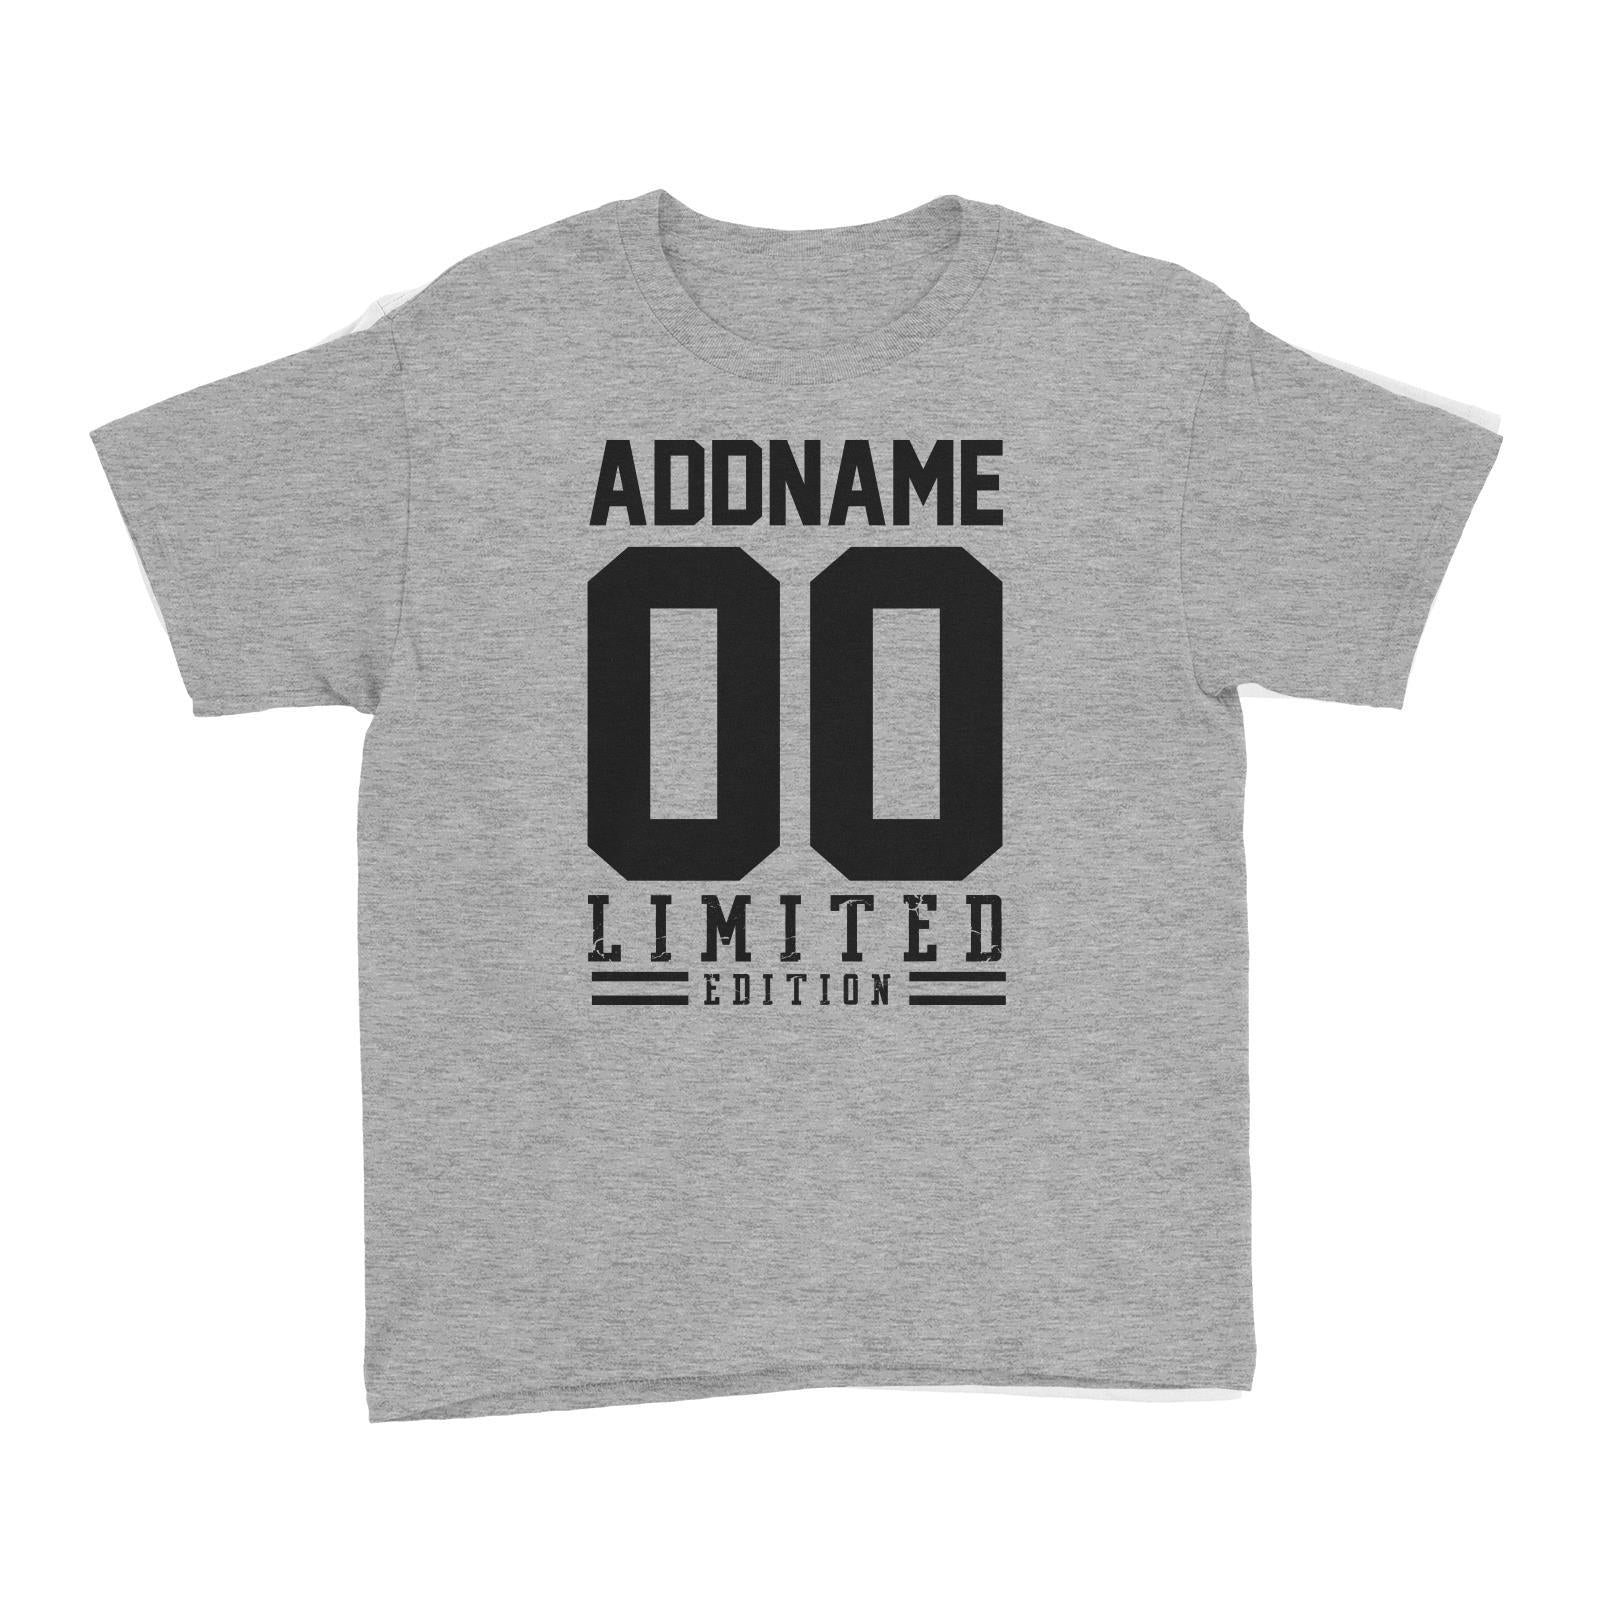 Limited Edition Jersey Personalizable with Name and Number Kid's T-Shirt